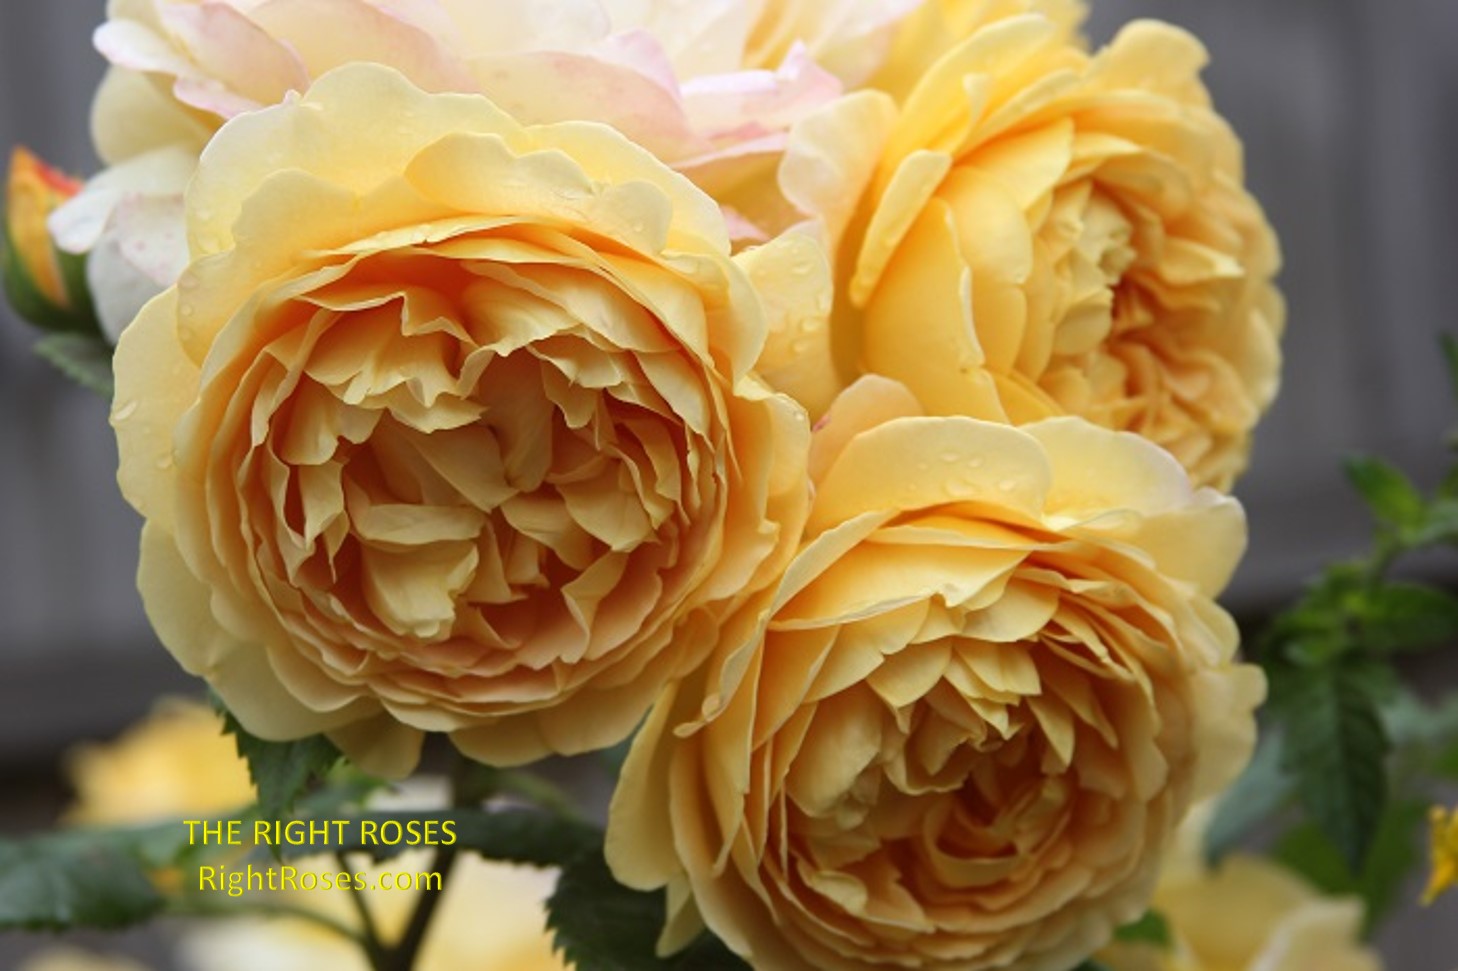 Rose Golden Celebration The Right Roses Best Garden Shop Store rose review experience top yellow power tools english david austin